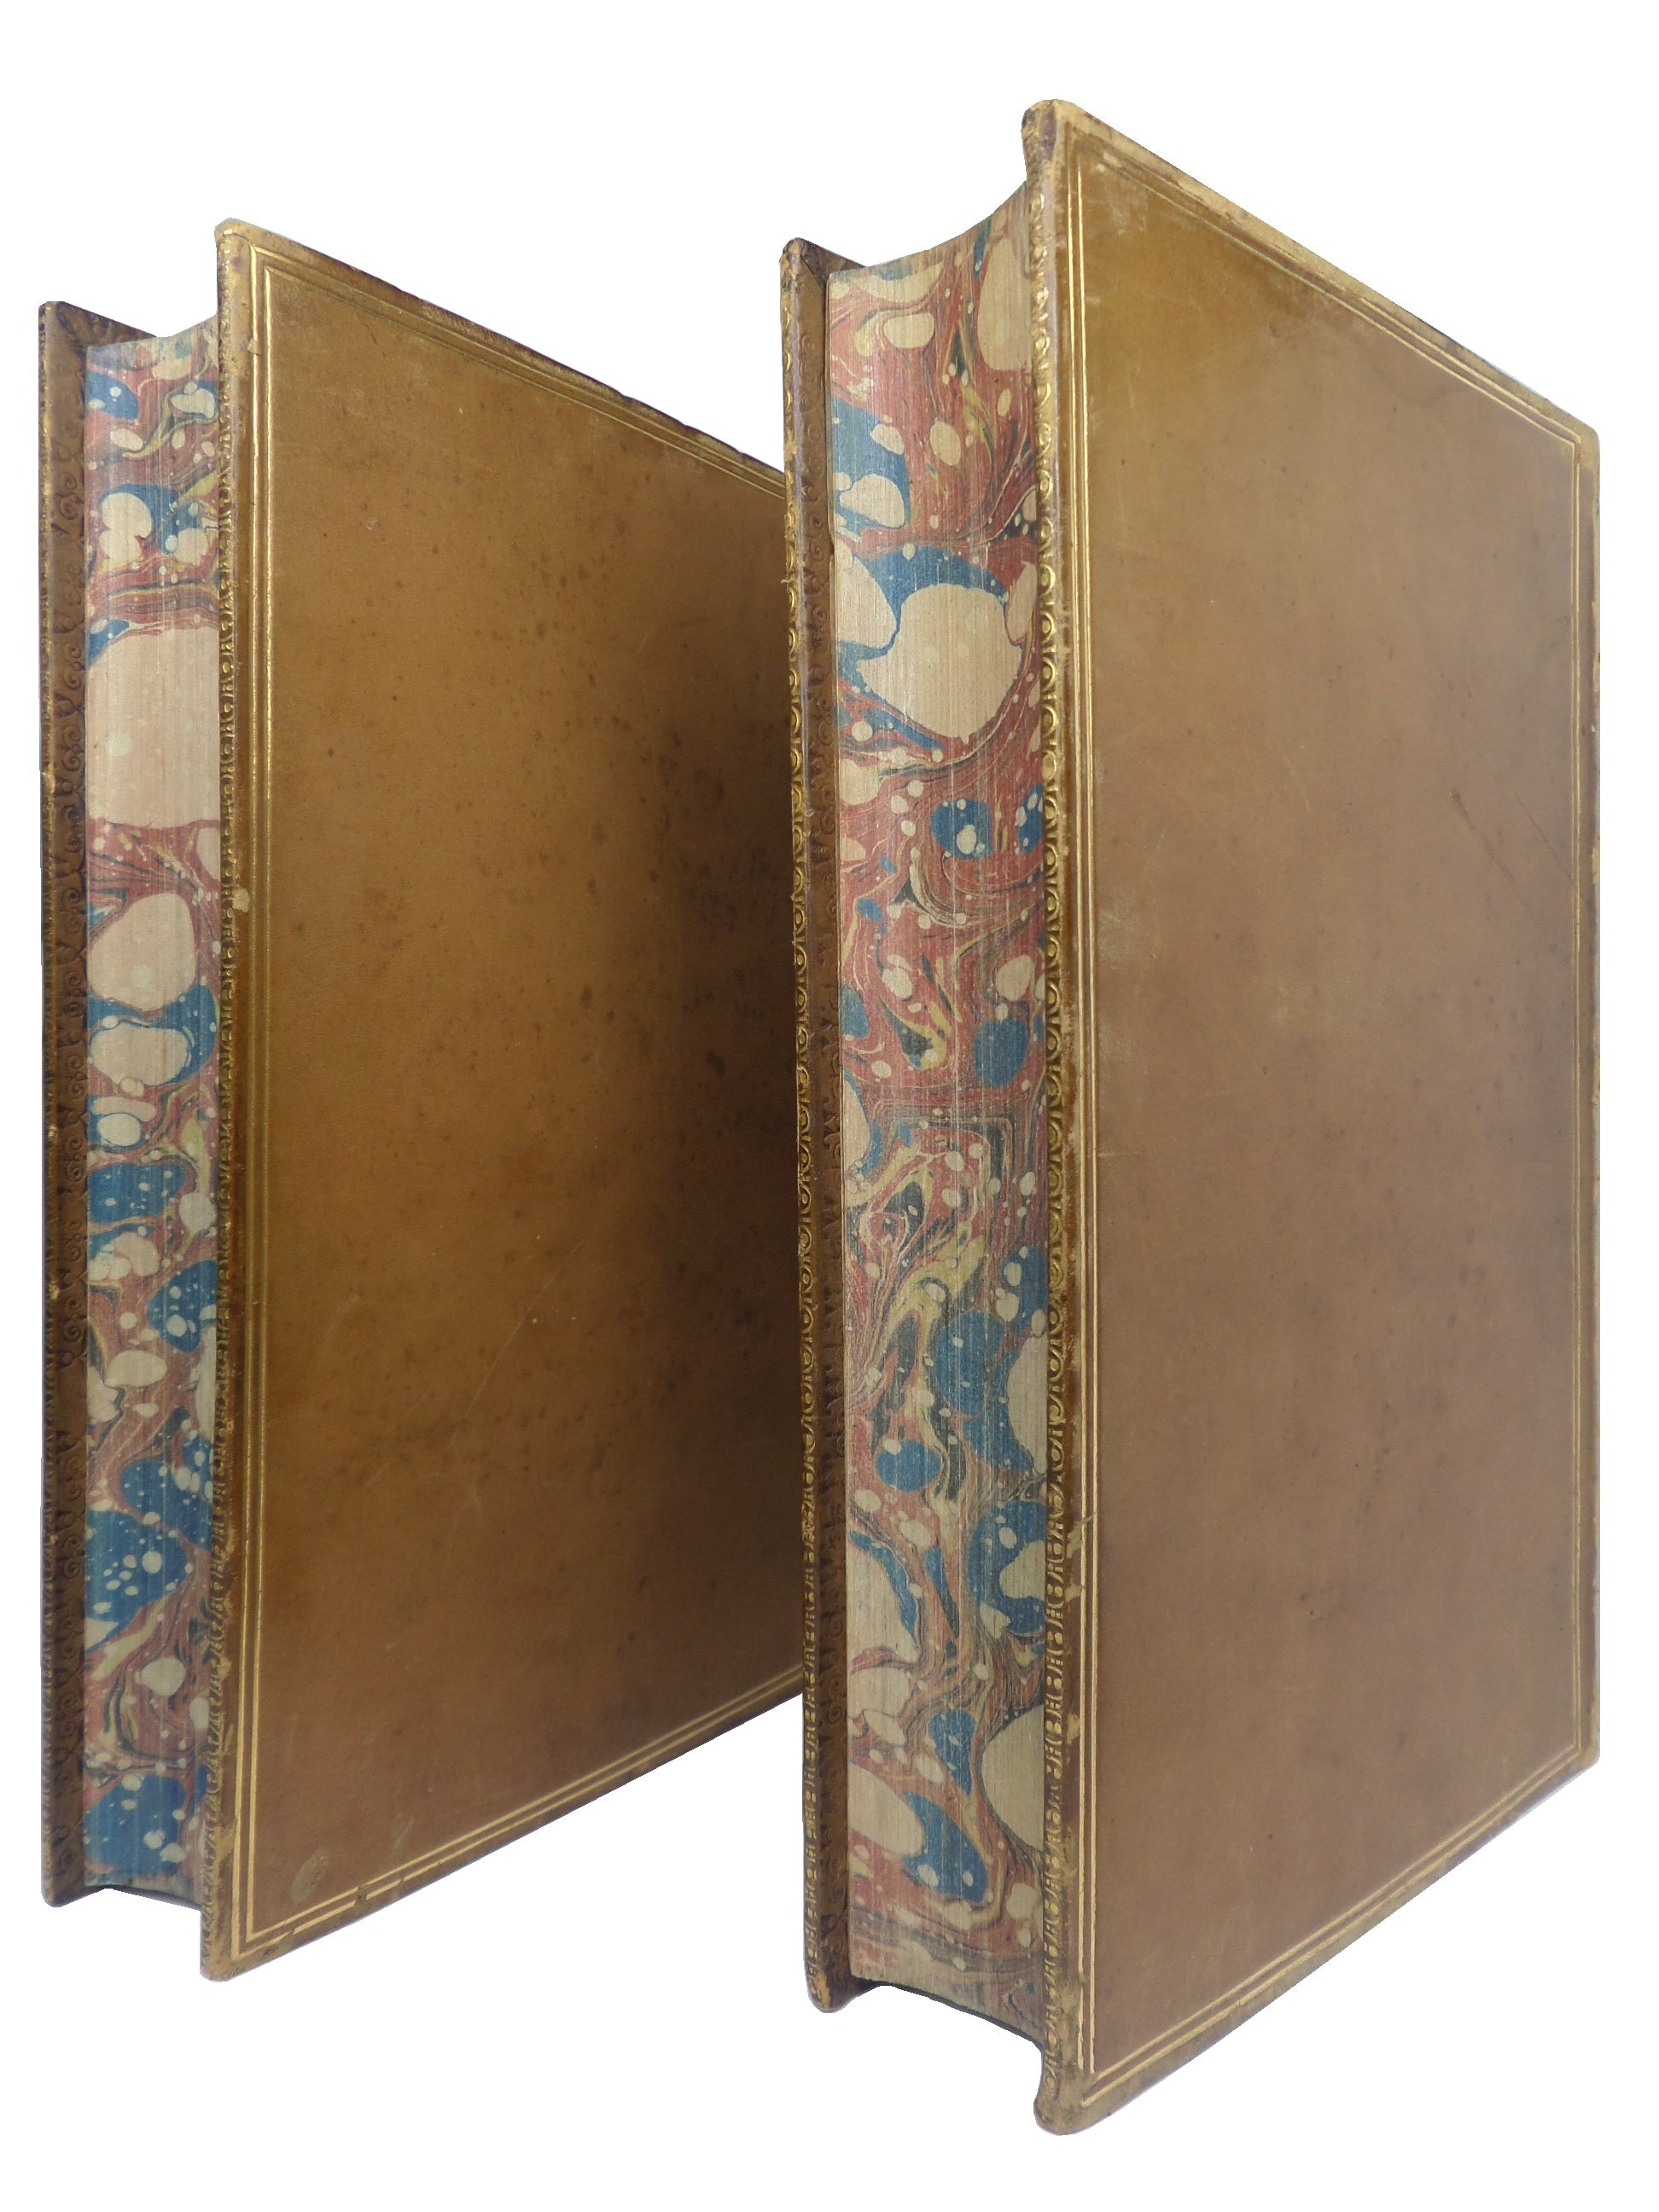 THE HISTORIES OF HERODOTUS WITH A COMMENTARY BY JOSEPH W. BLAKESLEY 1854 LEATHER-BOUND SET